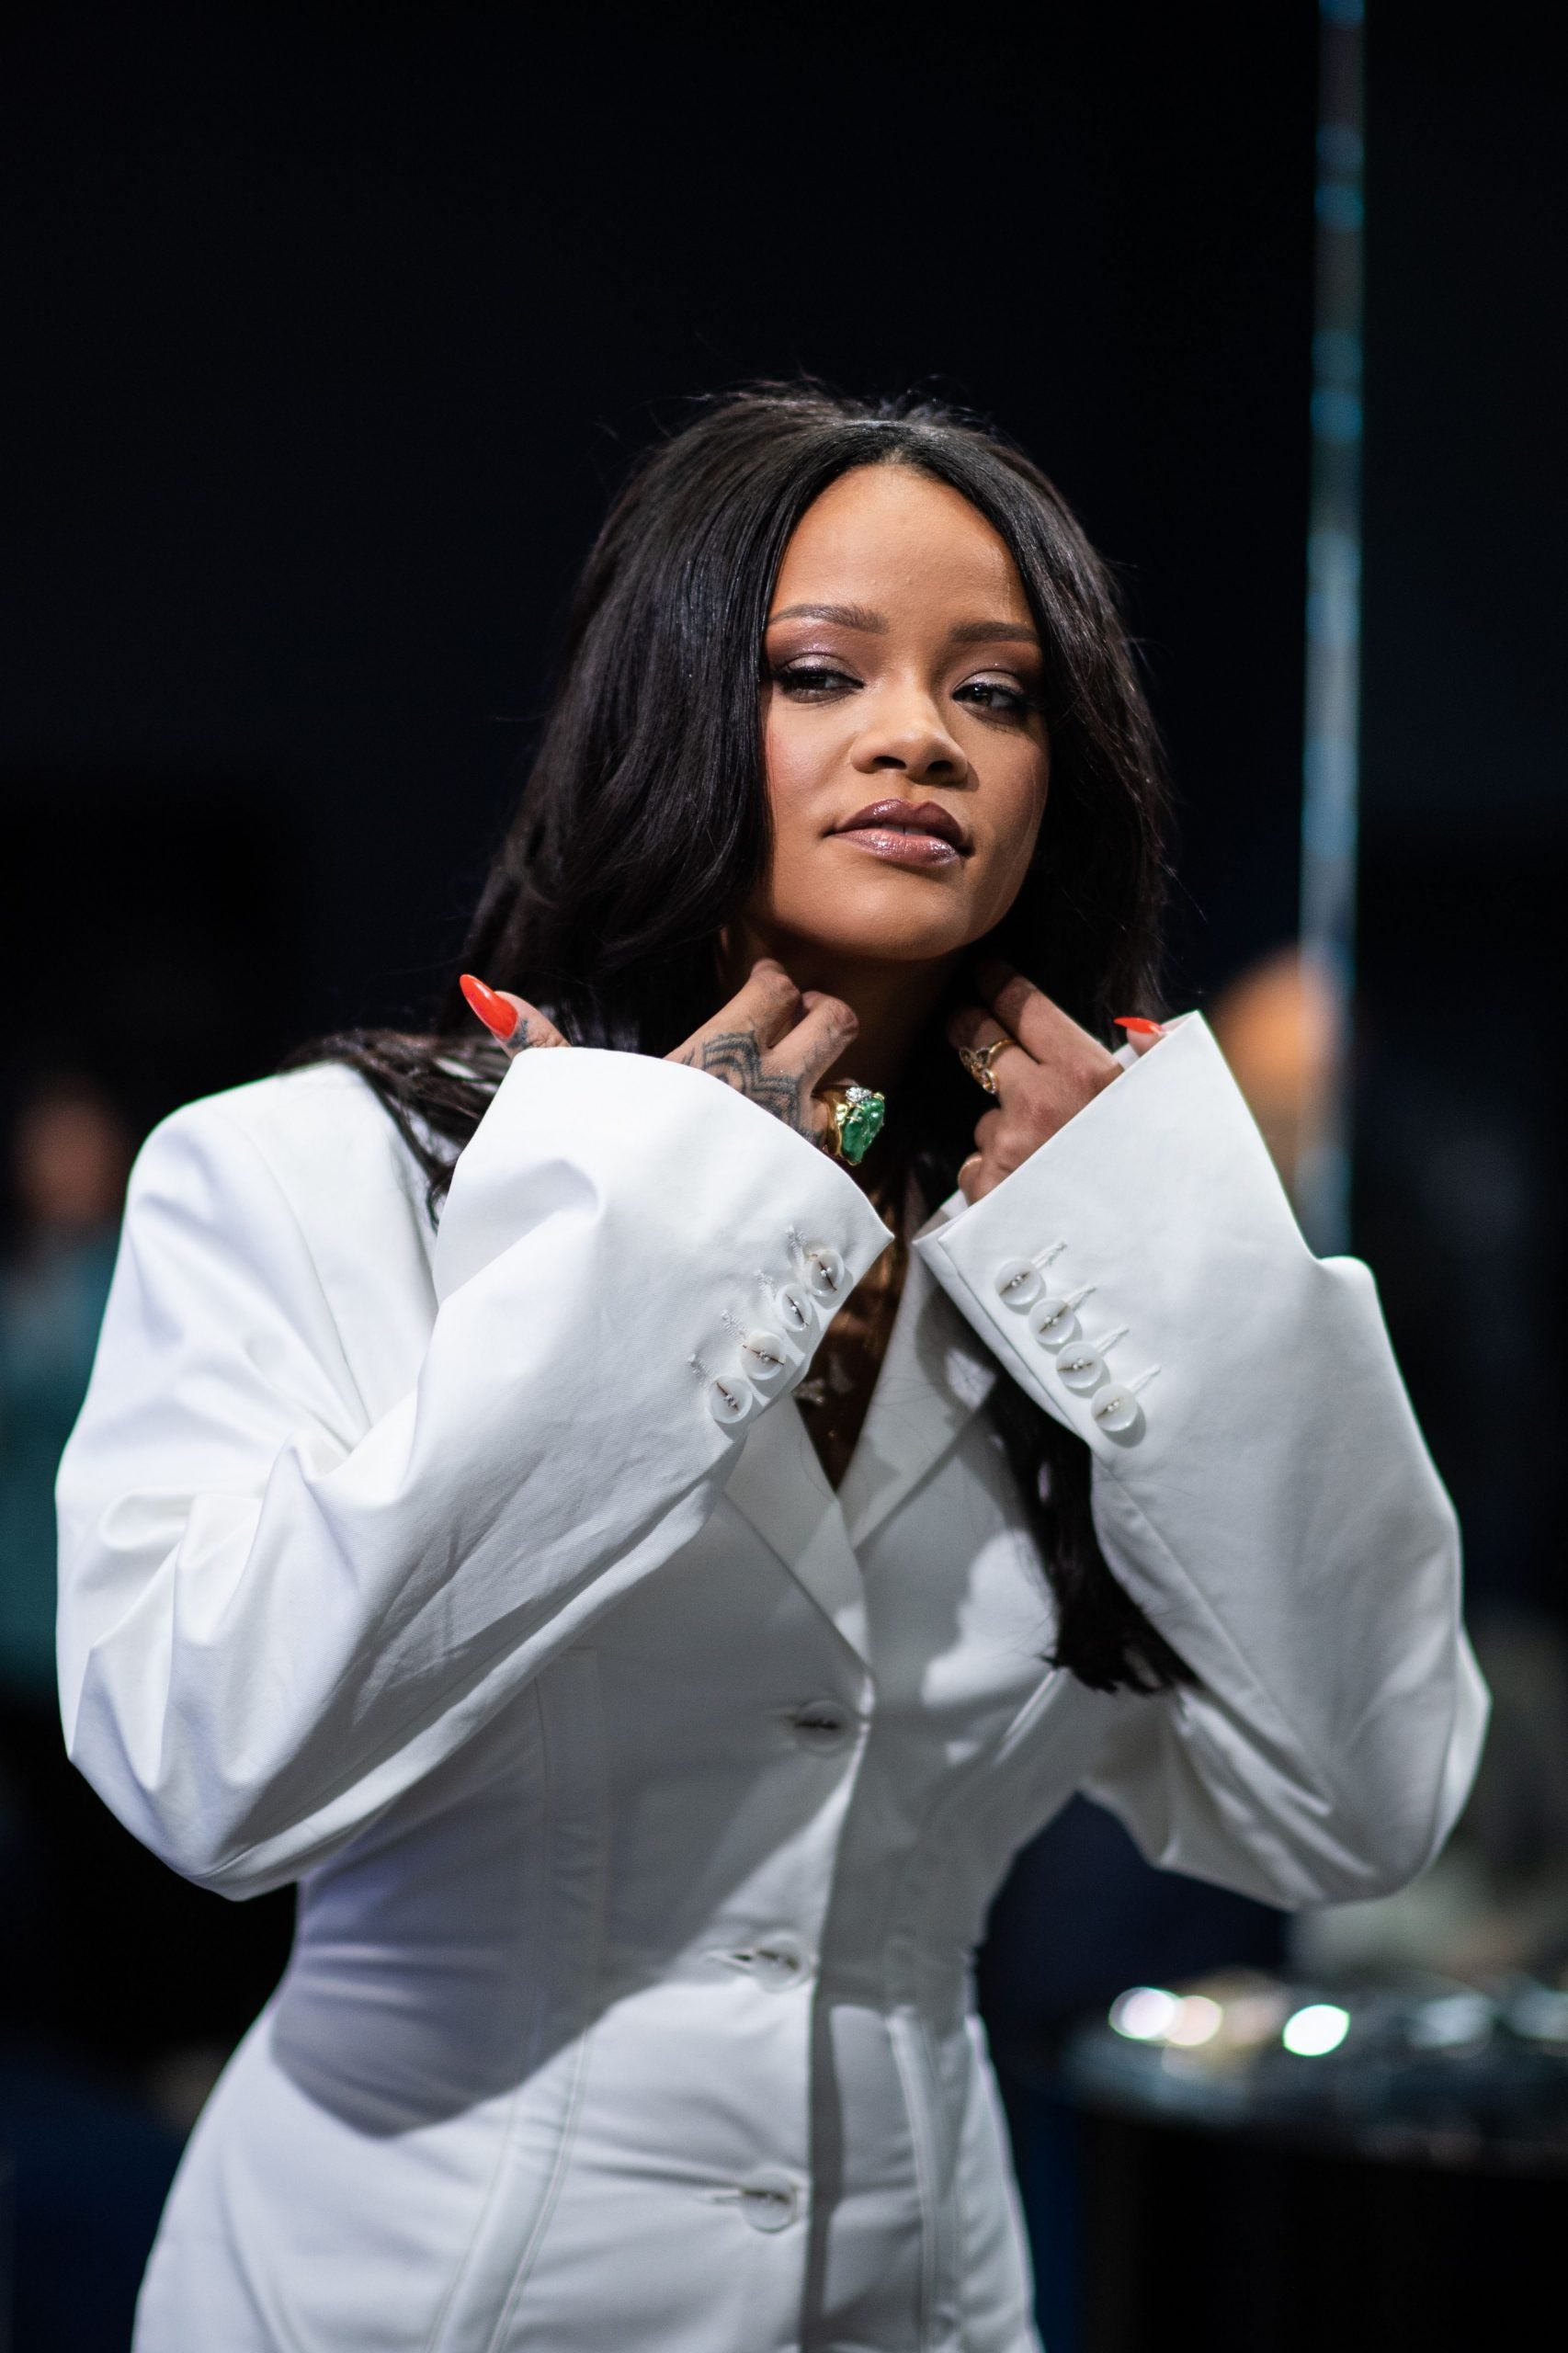 15 Of Rihanna's Best Fashion Moments From The Past Year